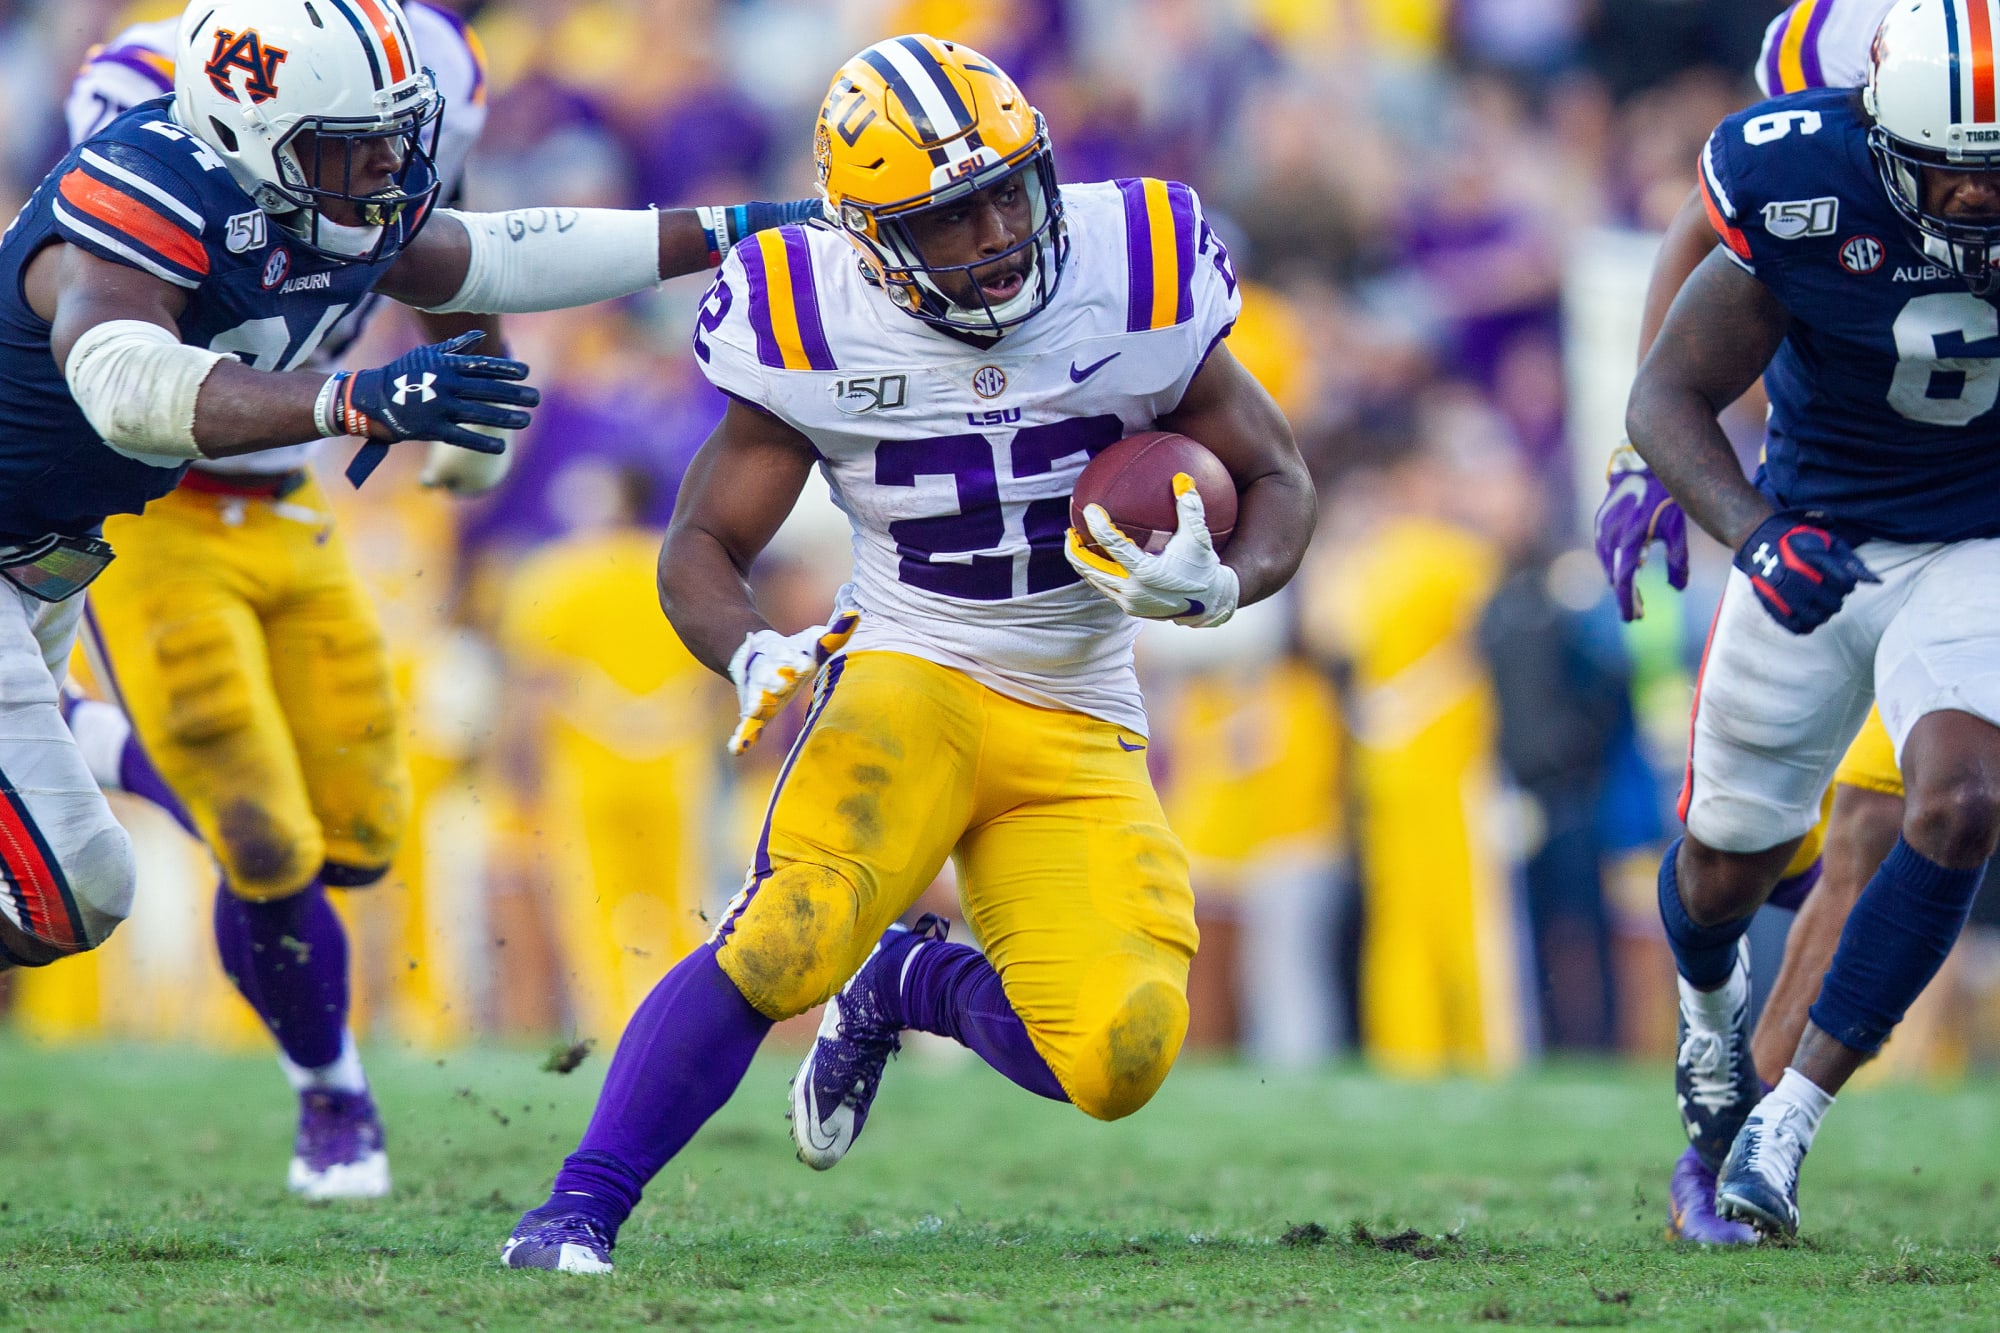 LSU vs. Alabama preview 5 stats you need to know